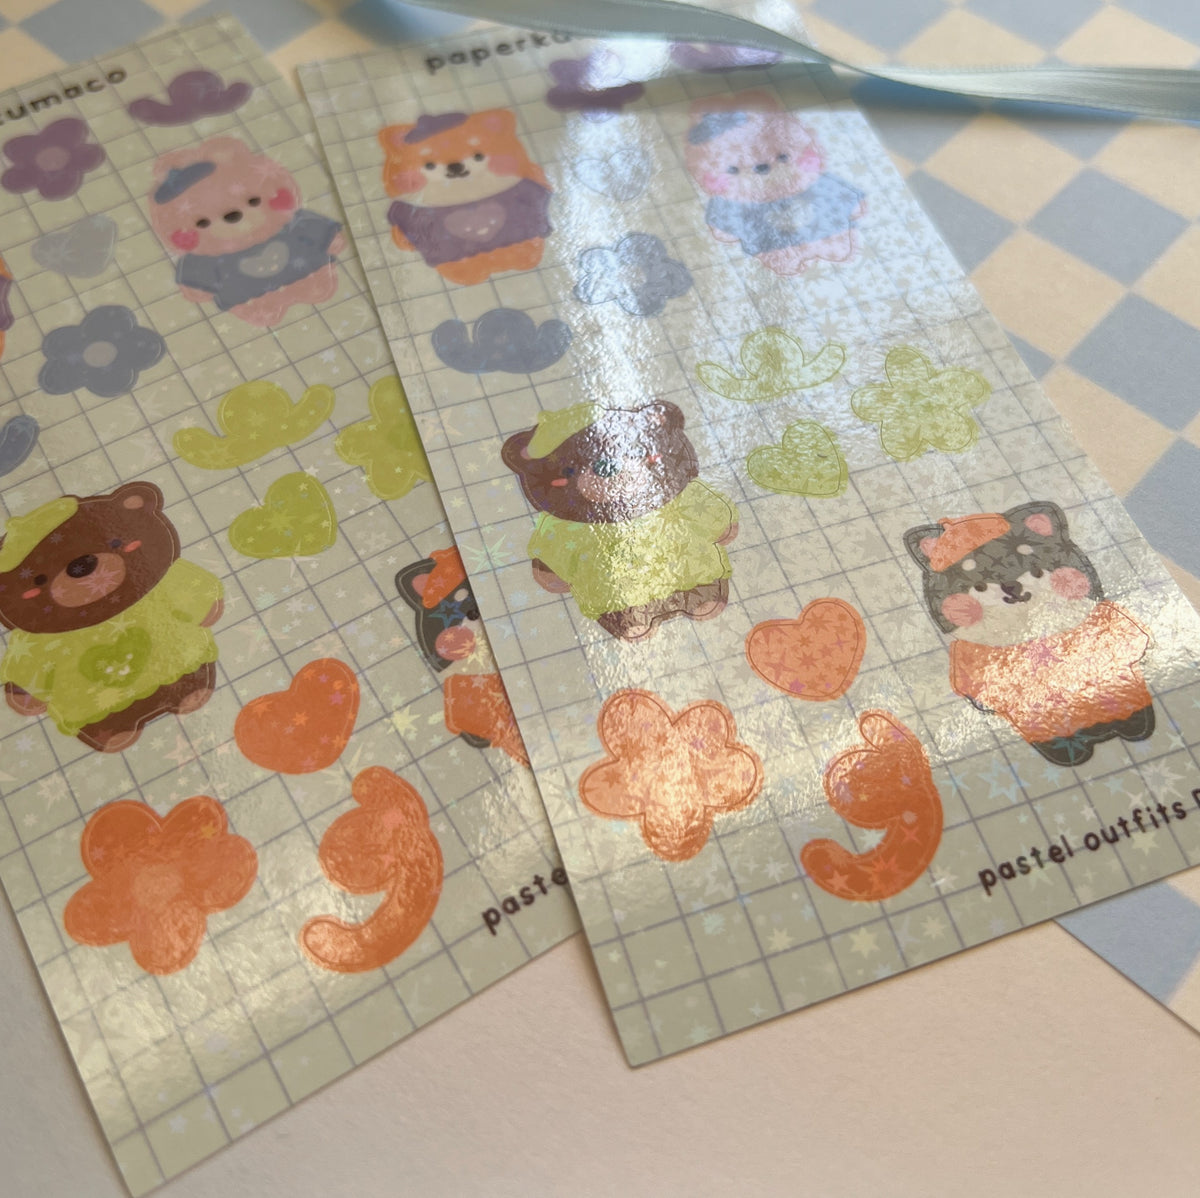 Pastel Outfits Shimmer Sticker Sheet